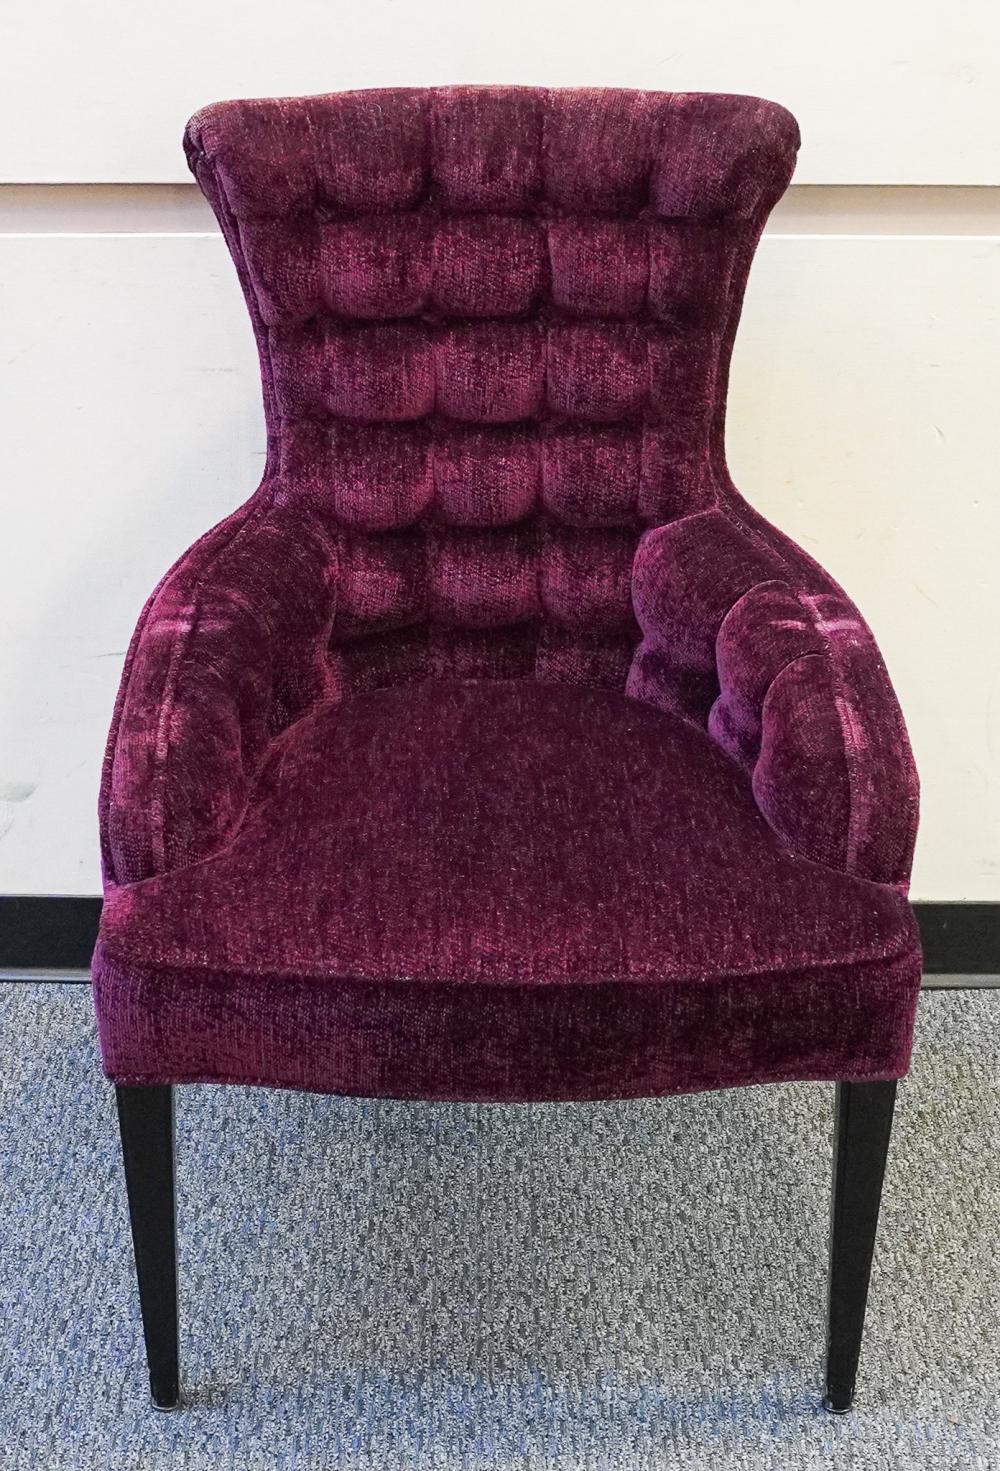 21th Century Nancy Corzine  Tufted Velvet Upholstered Armchair. Excellwnt v8ntage condition. Measures 25.5